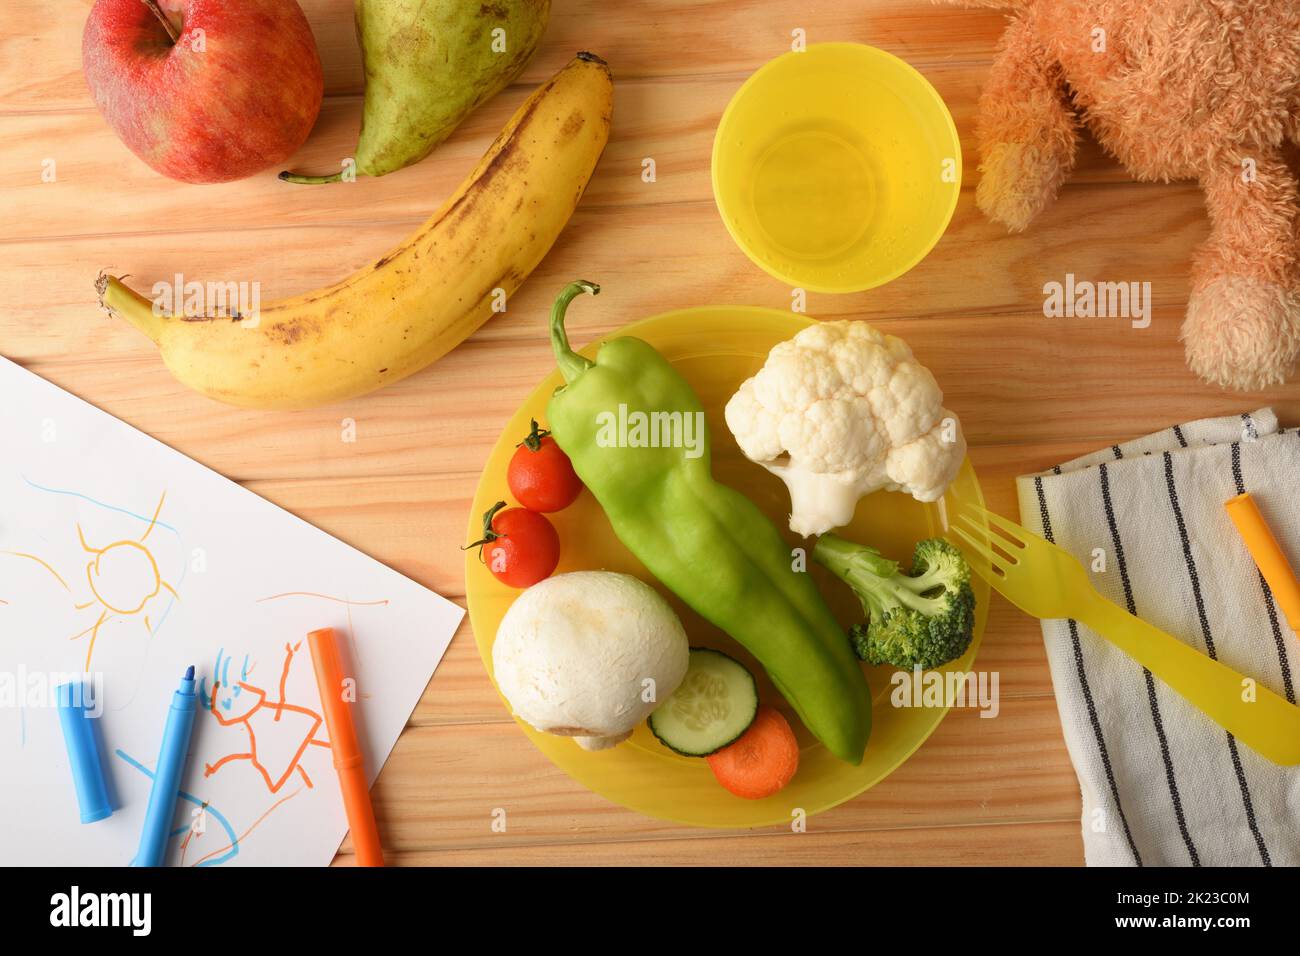 Concept of fun fruit and vegetables served in plastic containers on a wooden table prepared for a child with children's objects. Top view. Stock Photo